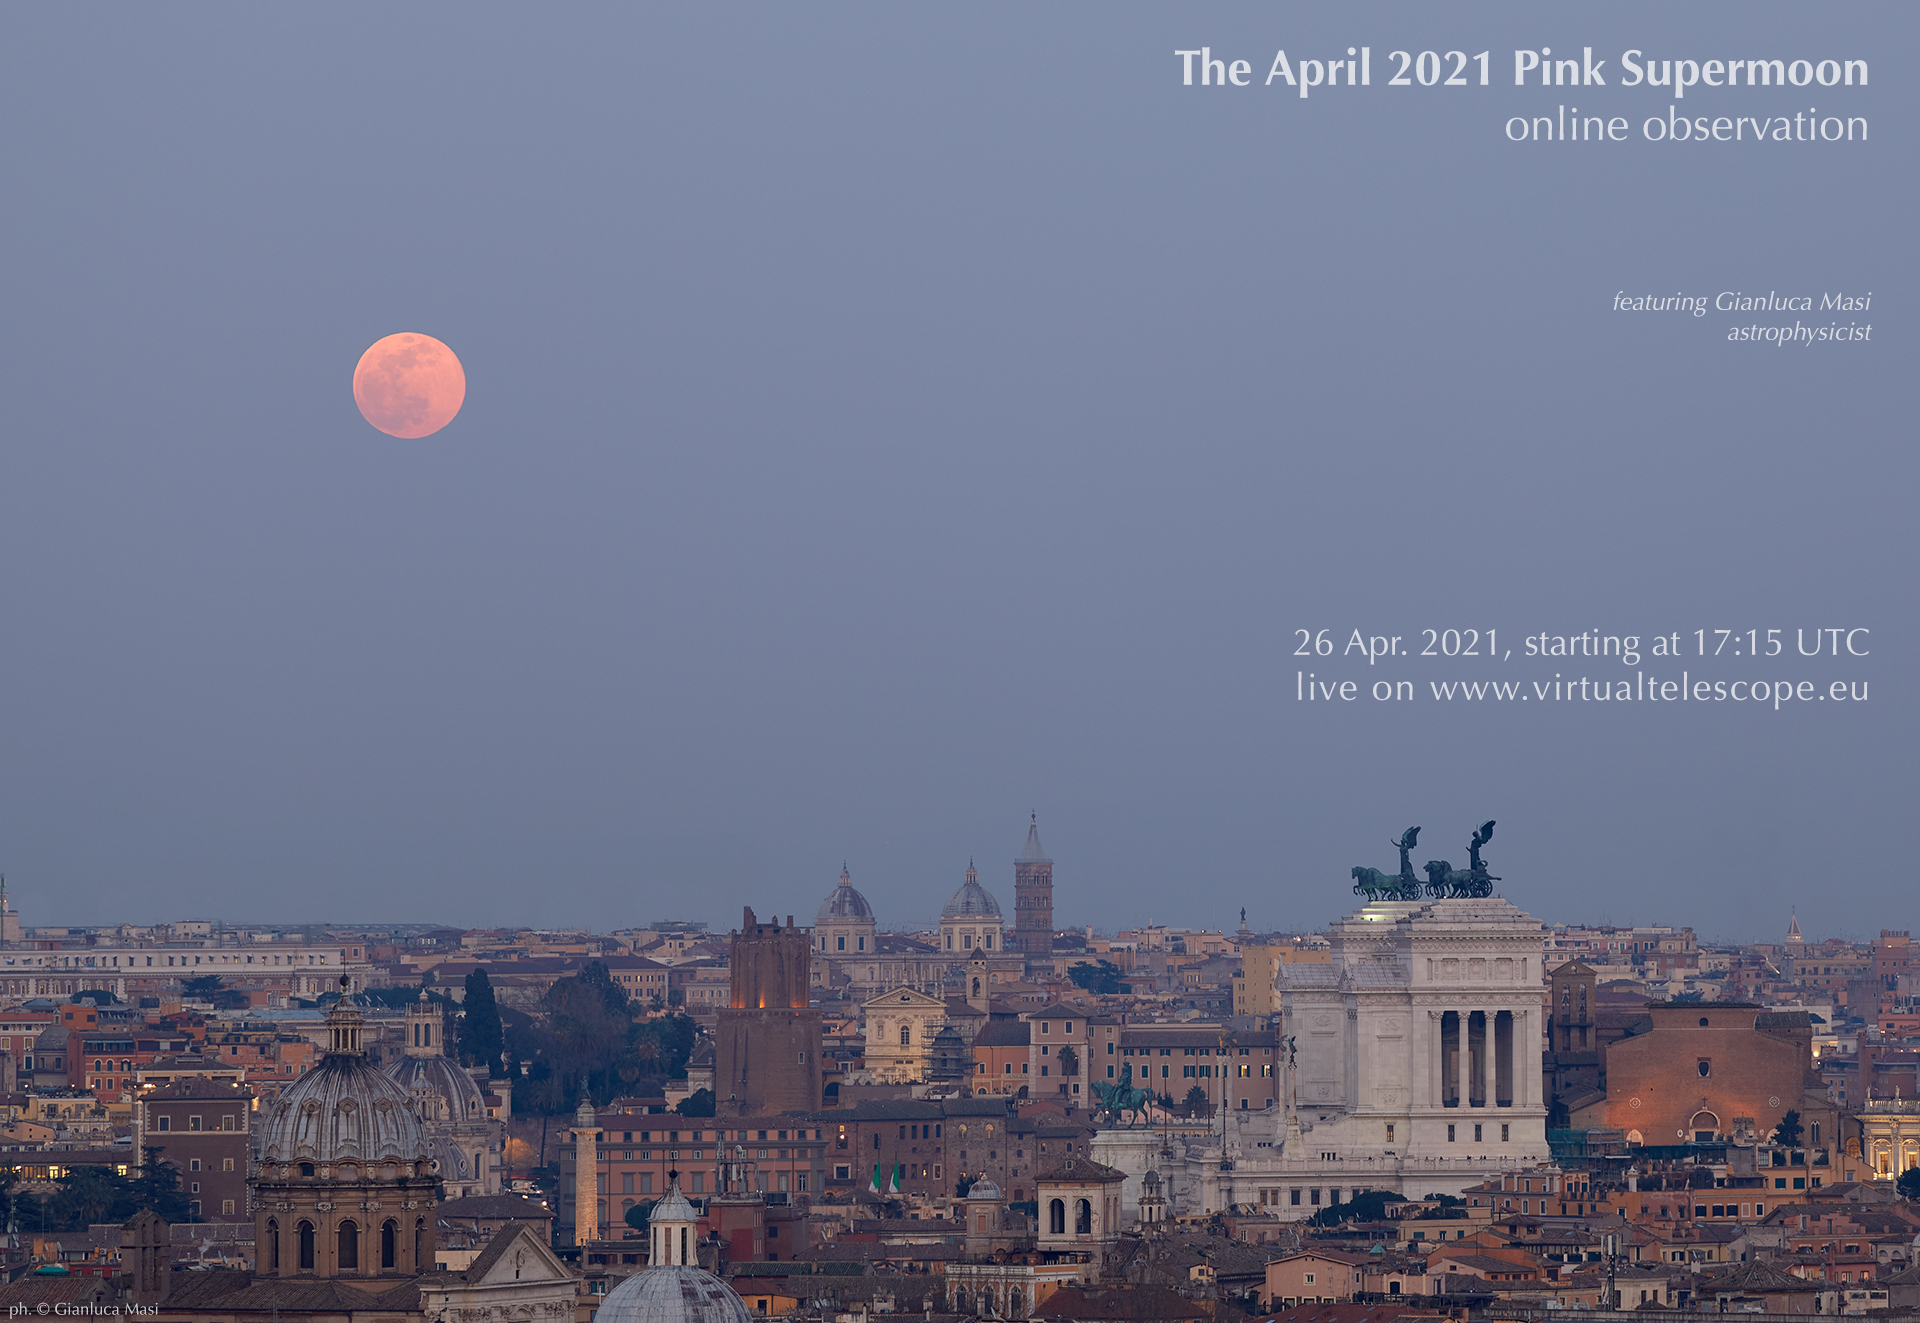 The April 2021 Pink Supermoon - poster of the event.